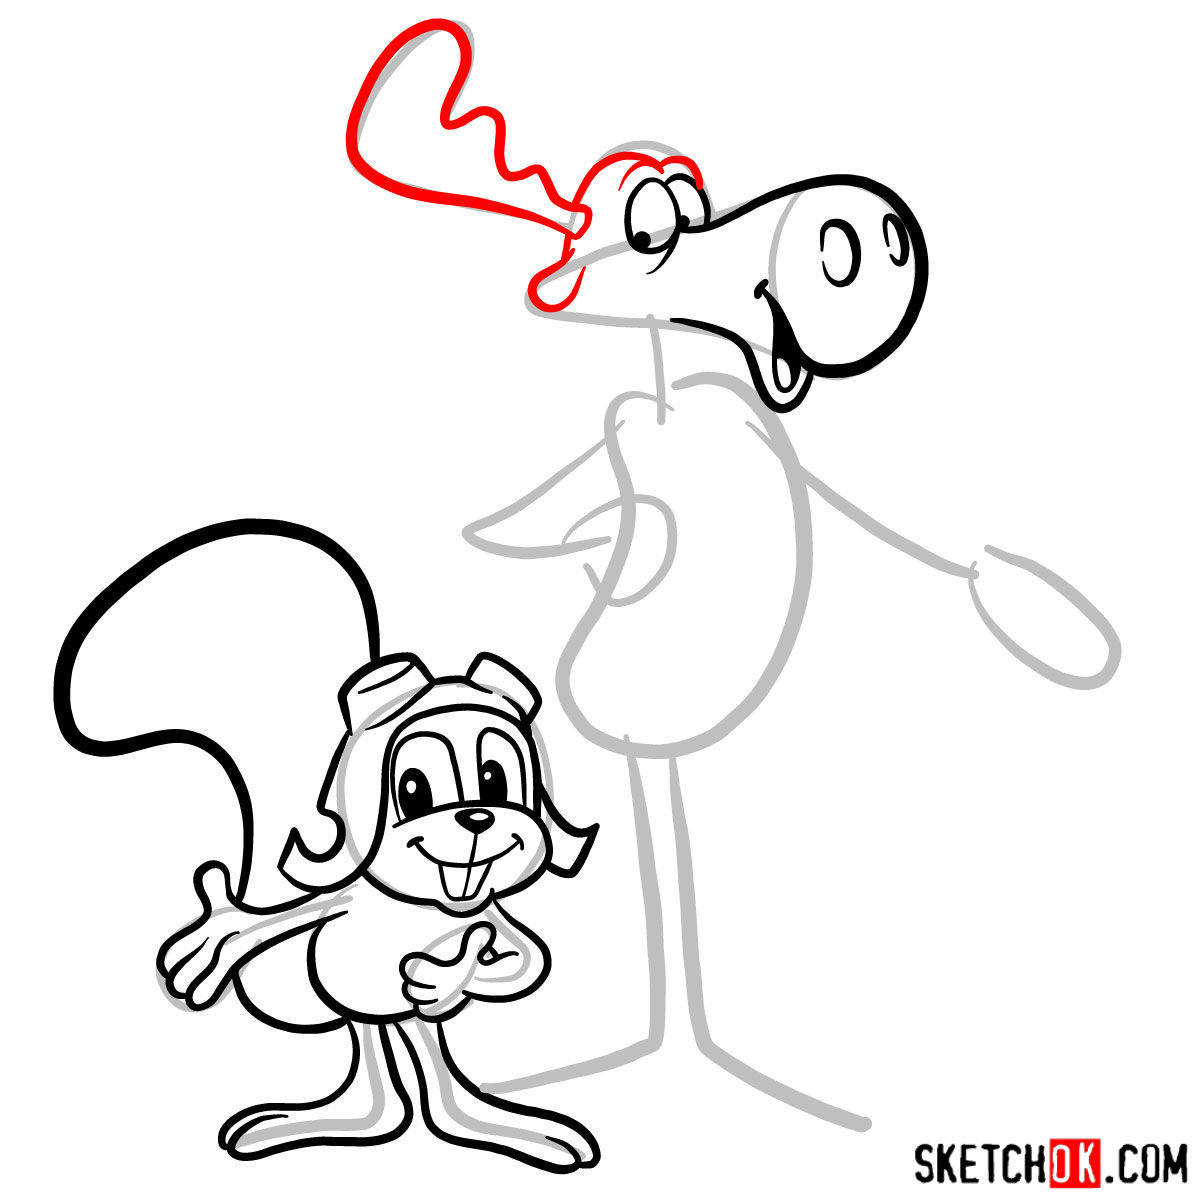 How to draw Rocky and Bullwinkle together - step 10